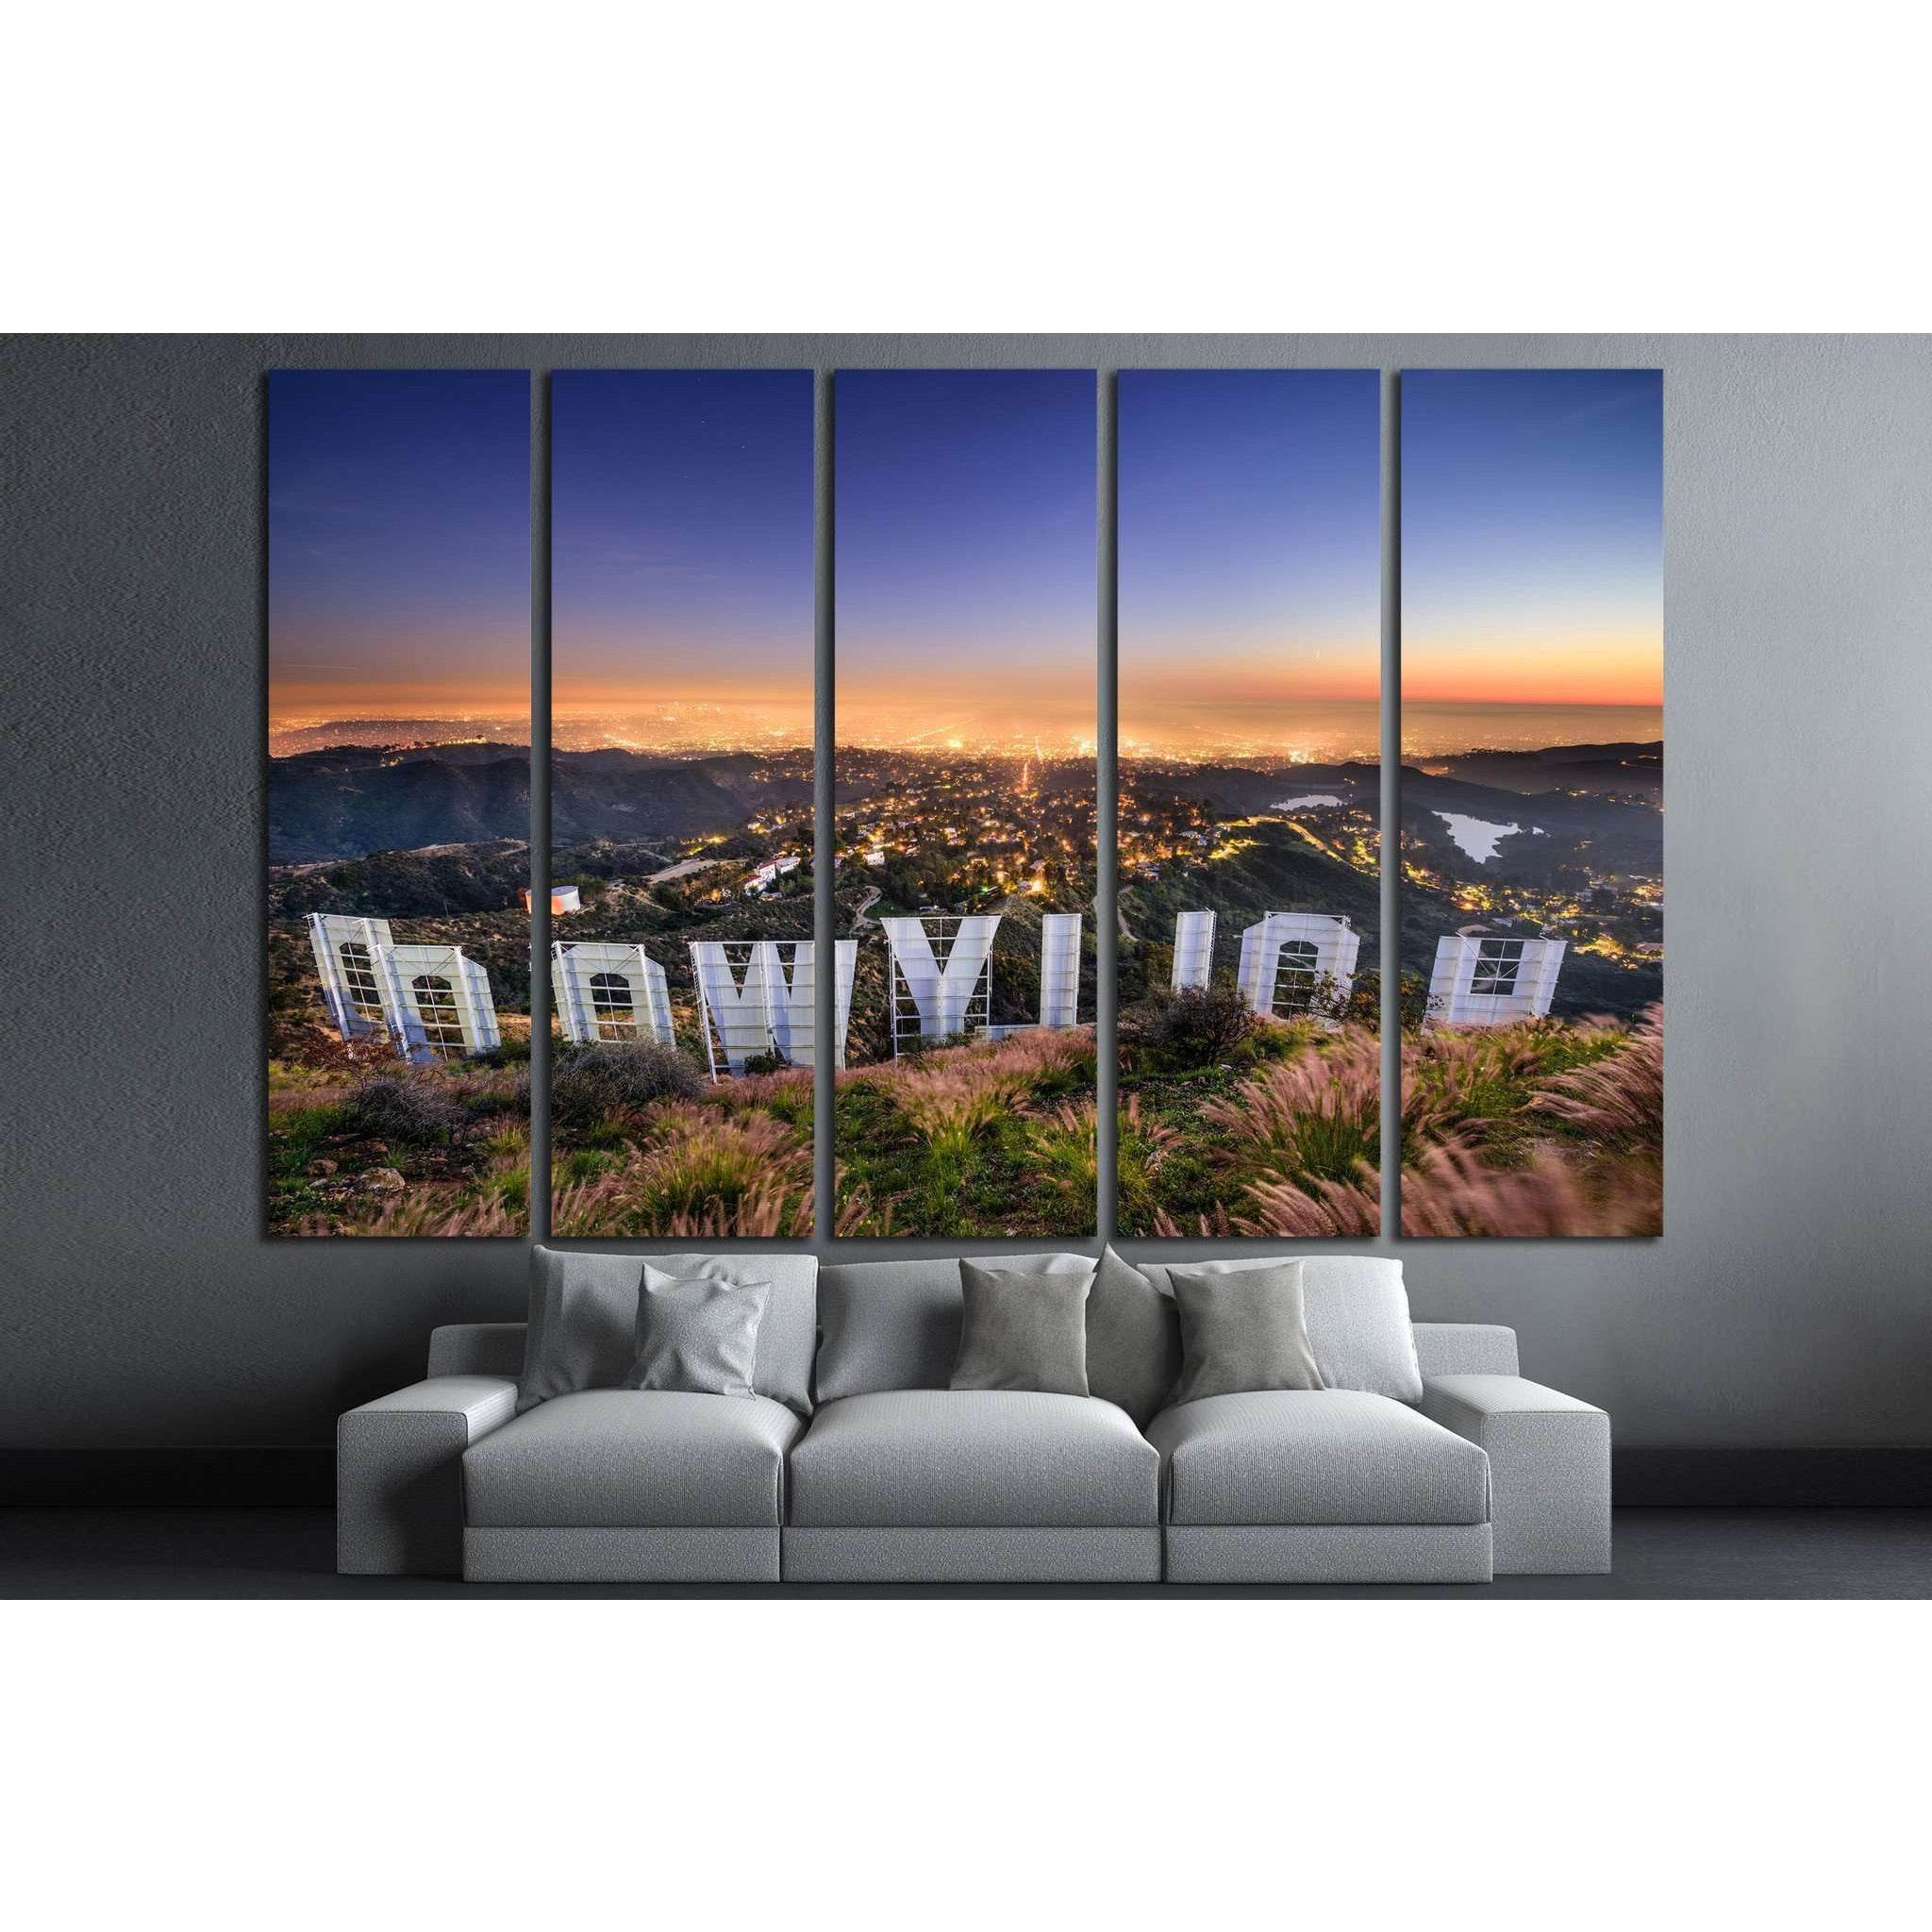 The Hollywood sign, LOS ANGELES, CALIFORNIA №1218 Ready to Hang Canvas Print